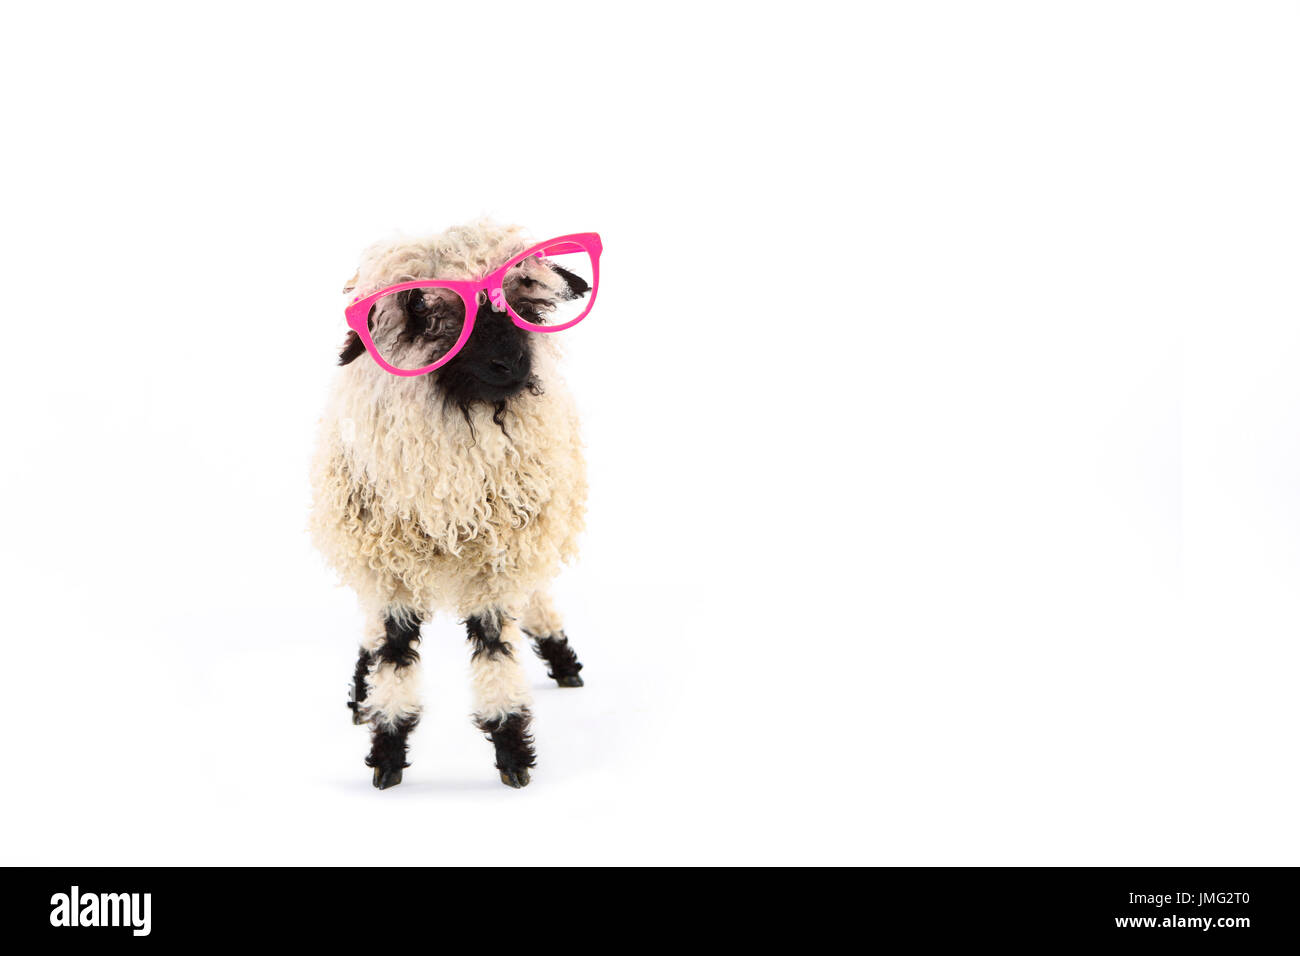 Valais Blacknose Sheep. Lamb standing, wearing pink glasses. Studio picture against a white background. Germany Stock Photo